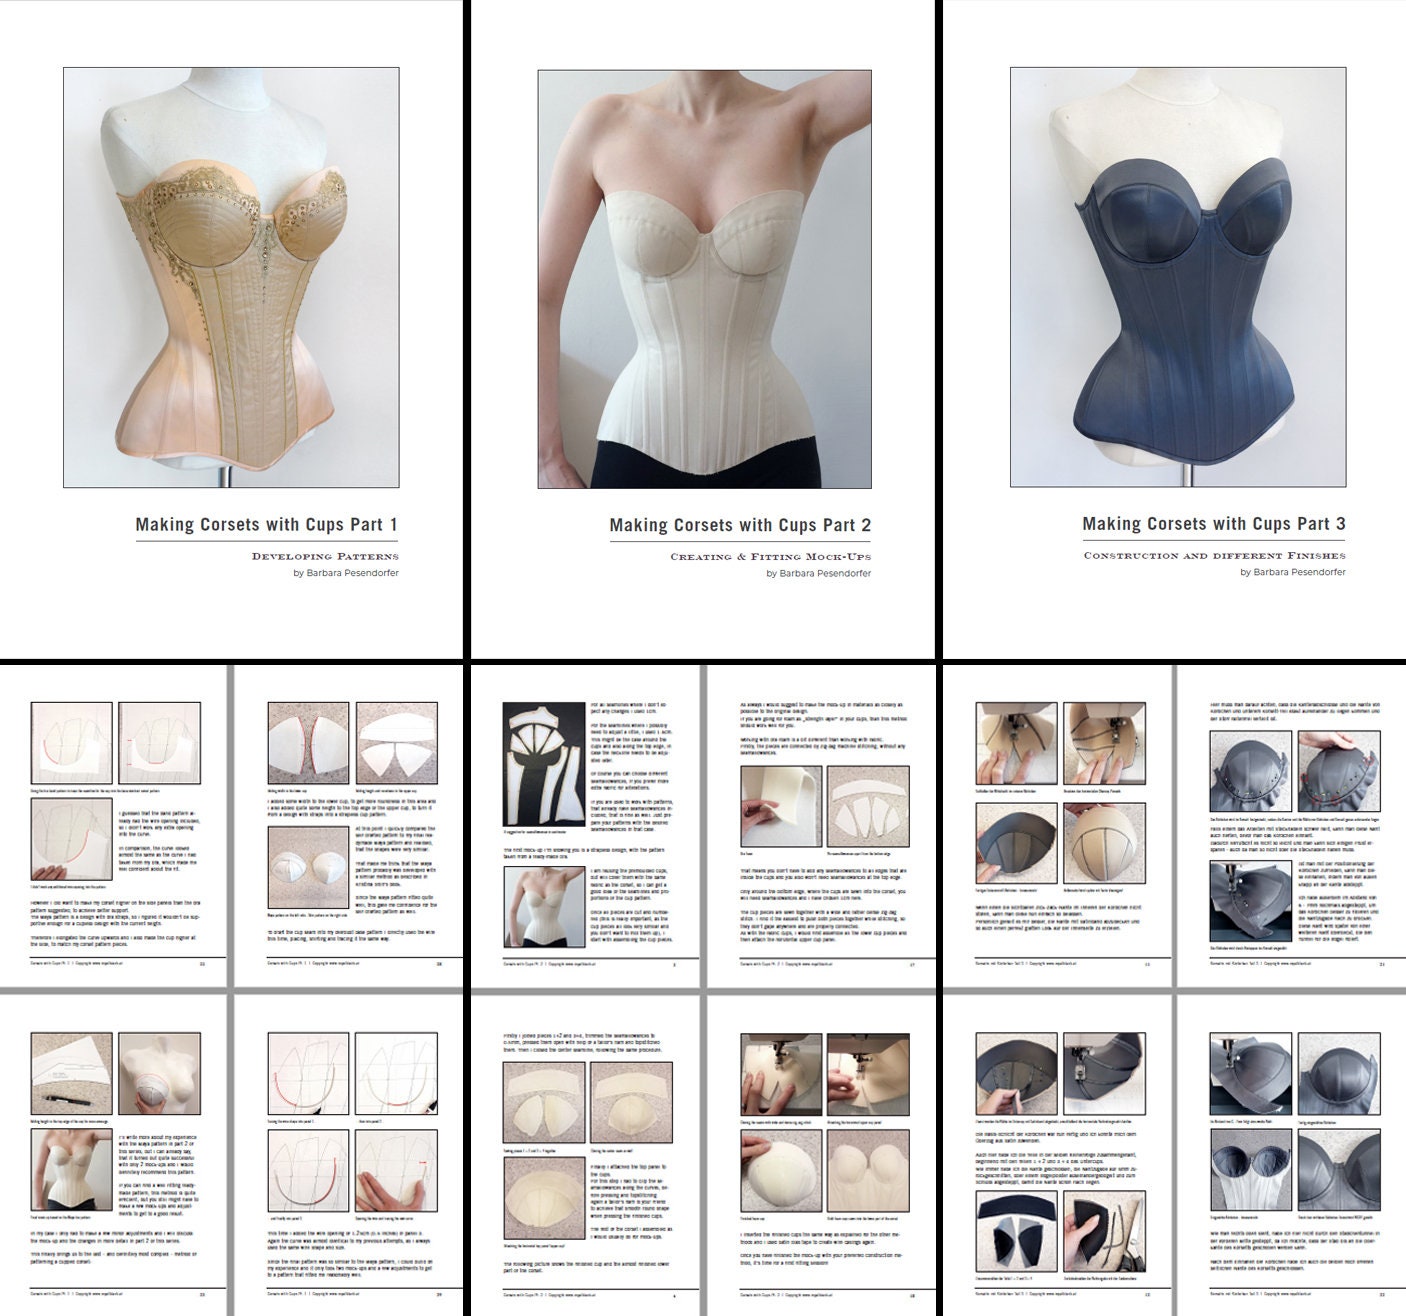 The Easiest way to draft a VICTORIAN corset pattern @Stitchadress